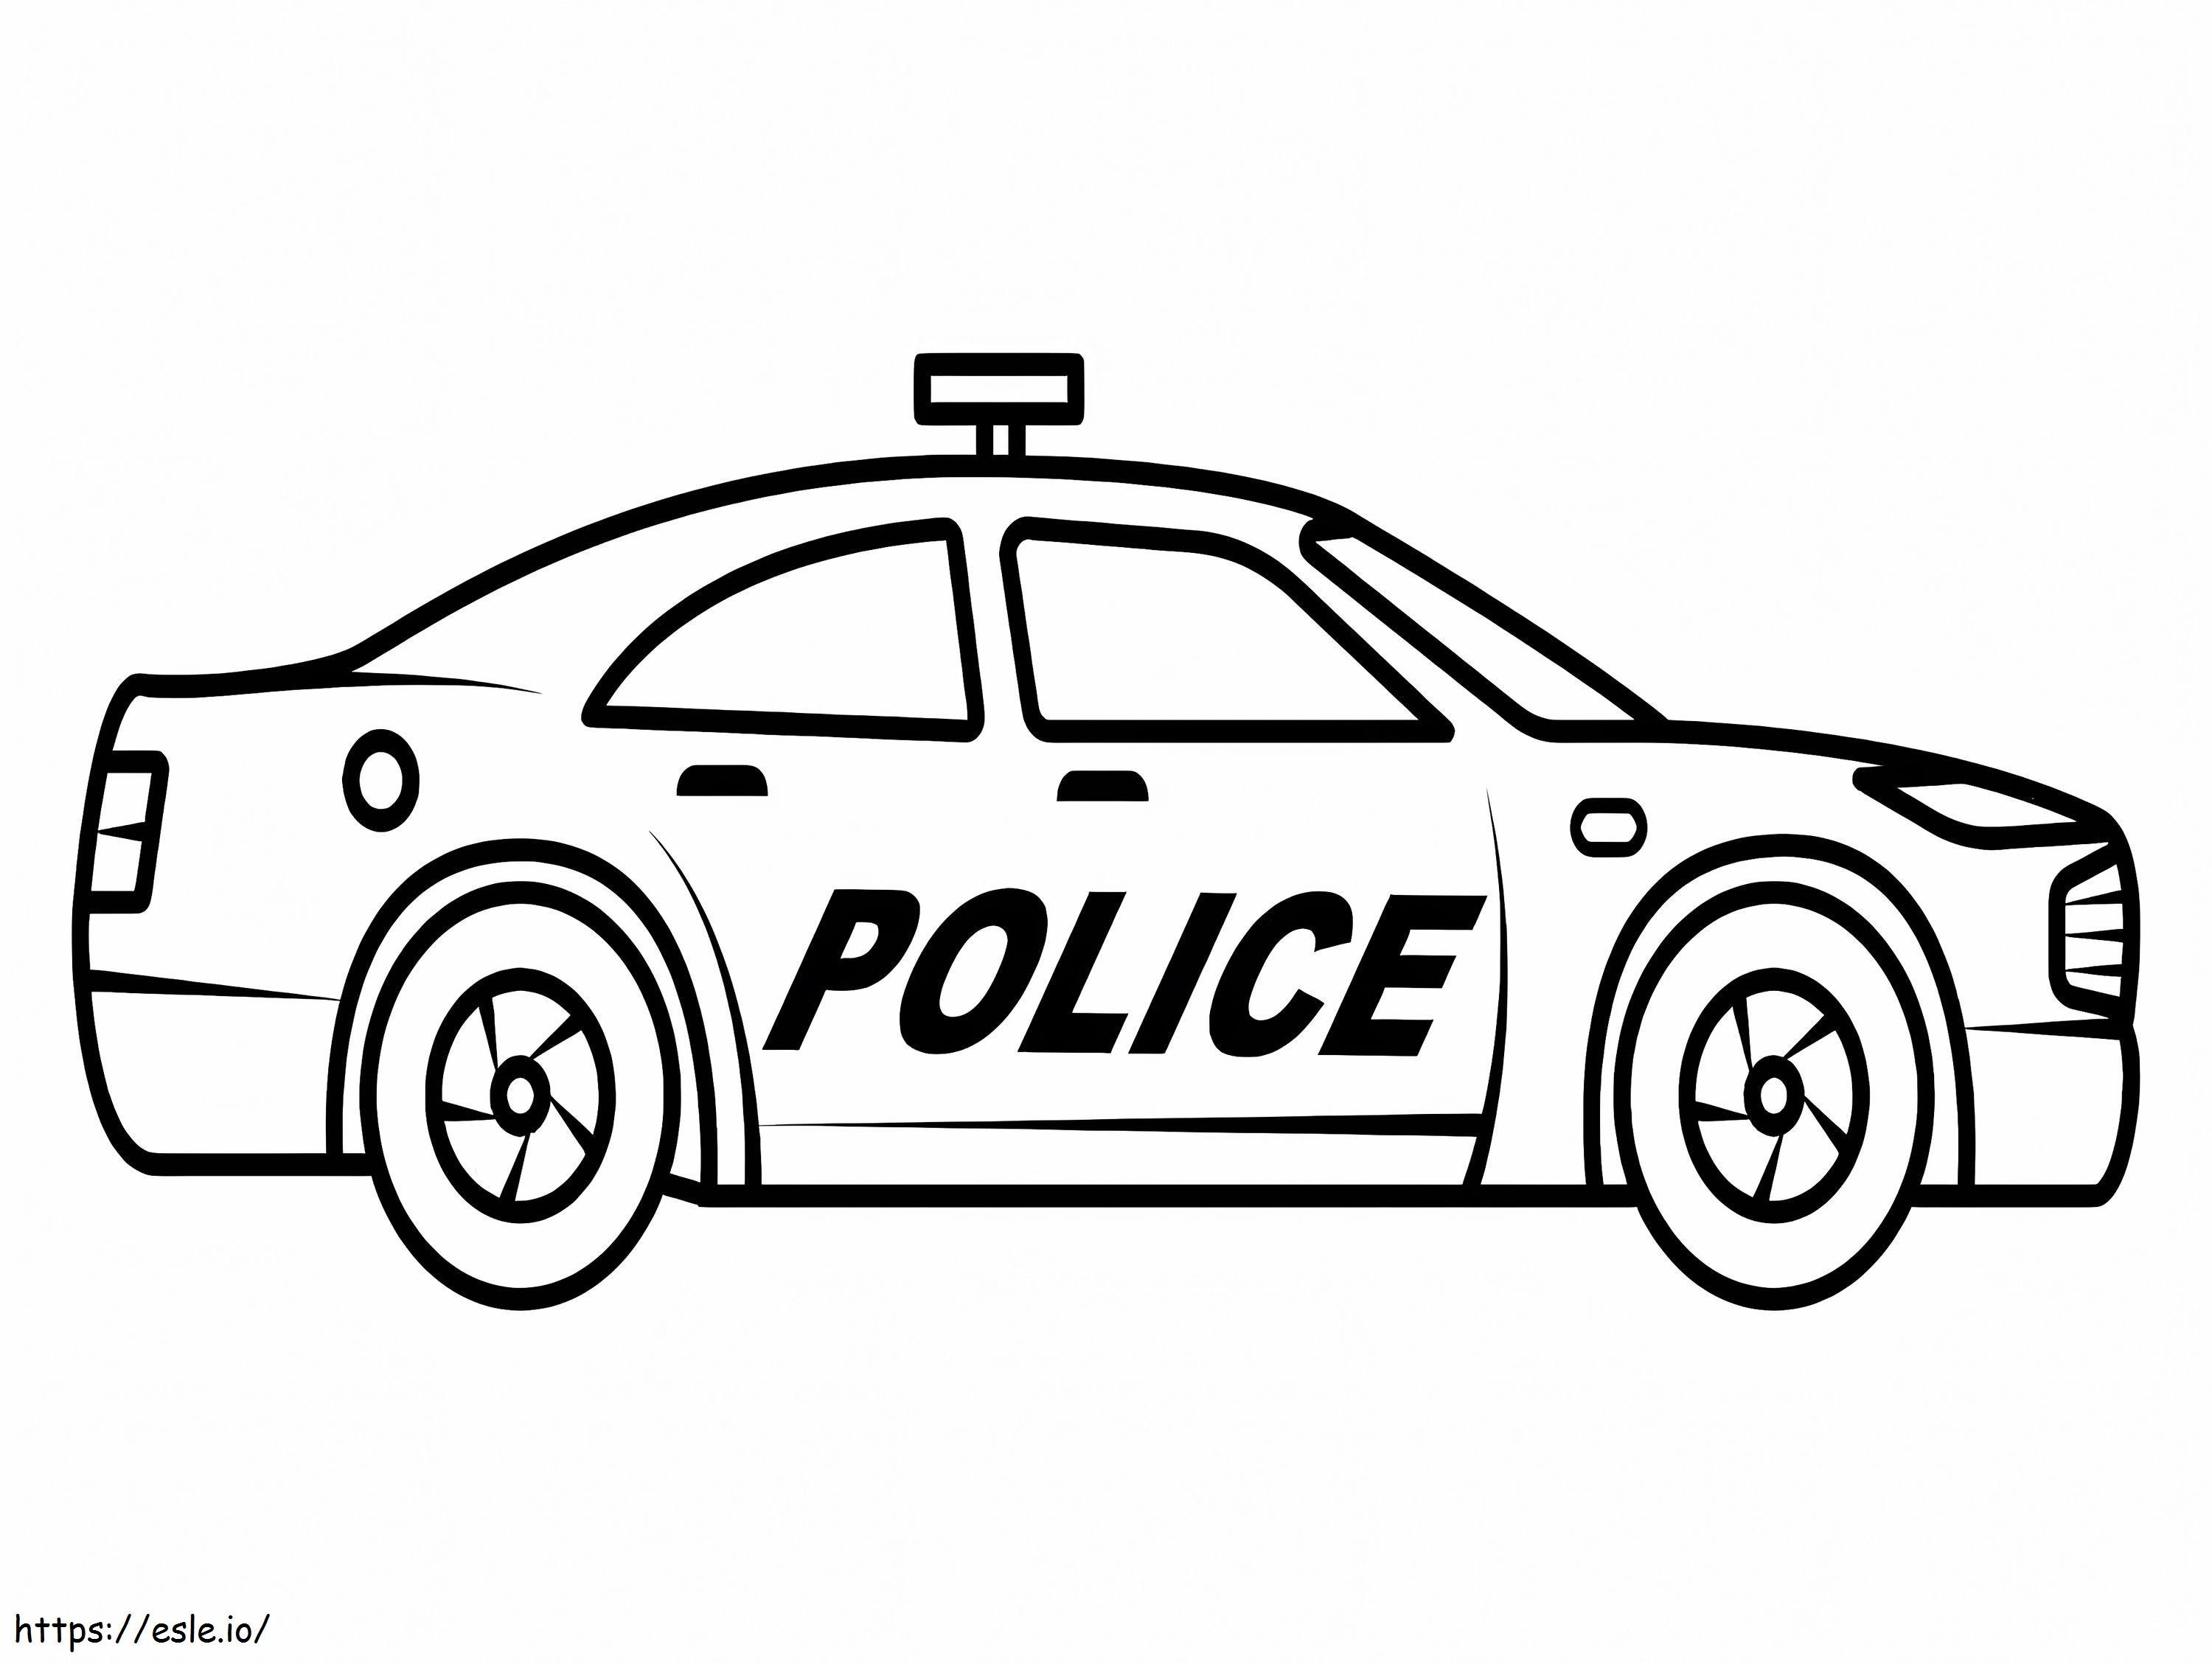 Police Car 13 coloring page